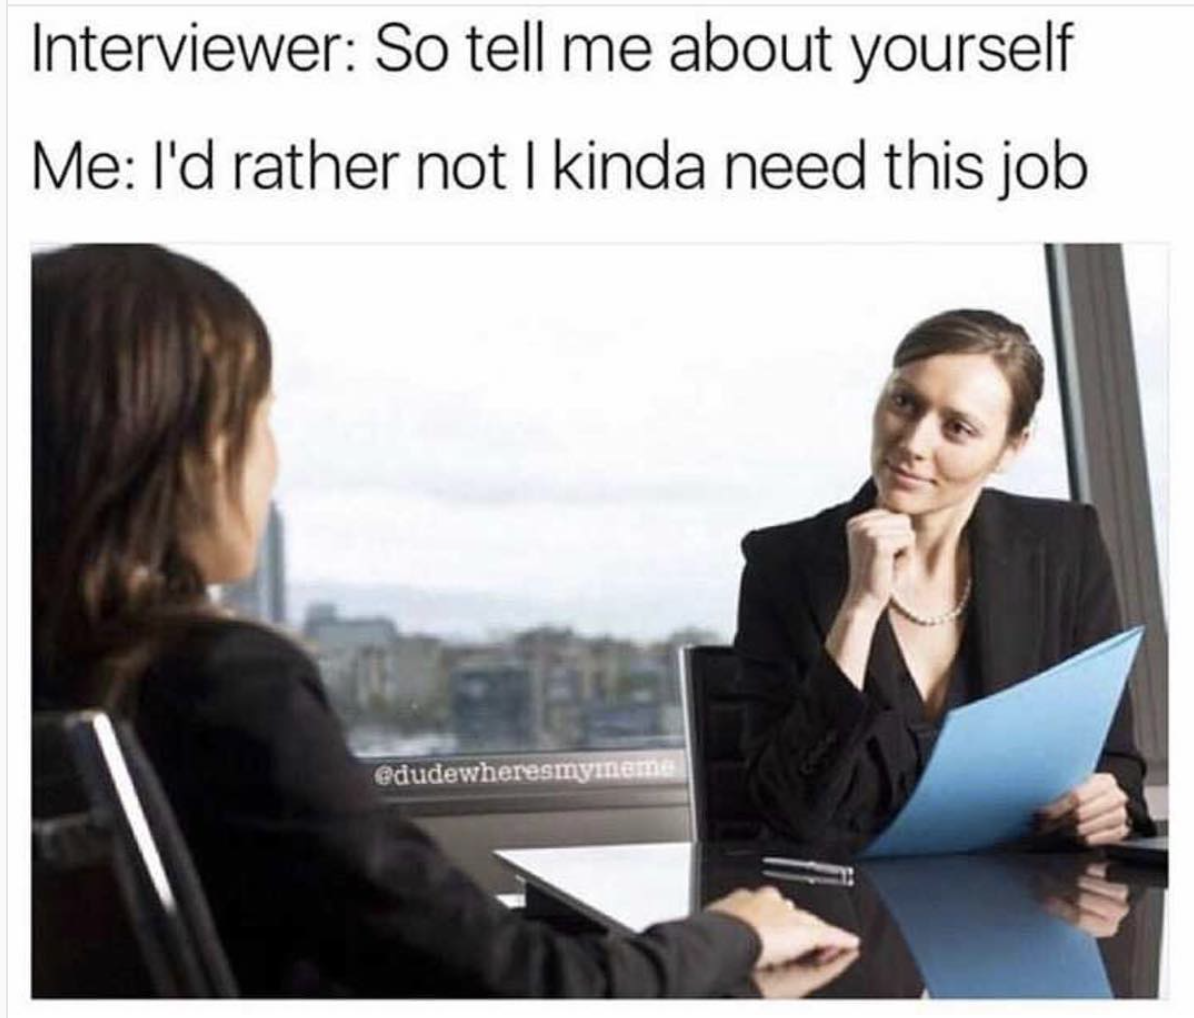 interview memes - Interviewer So tell me about yourself Me I'd rather not I kinda need this job edudewheresmymeme